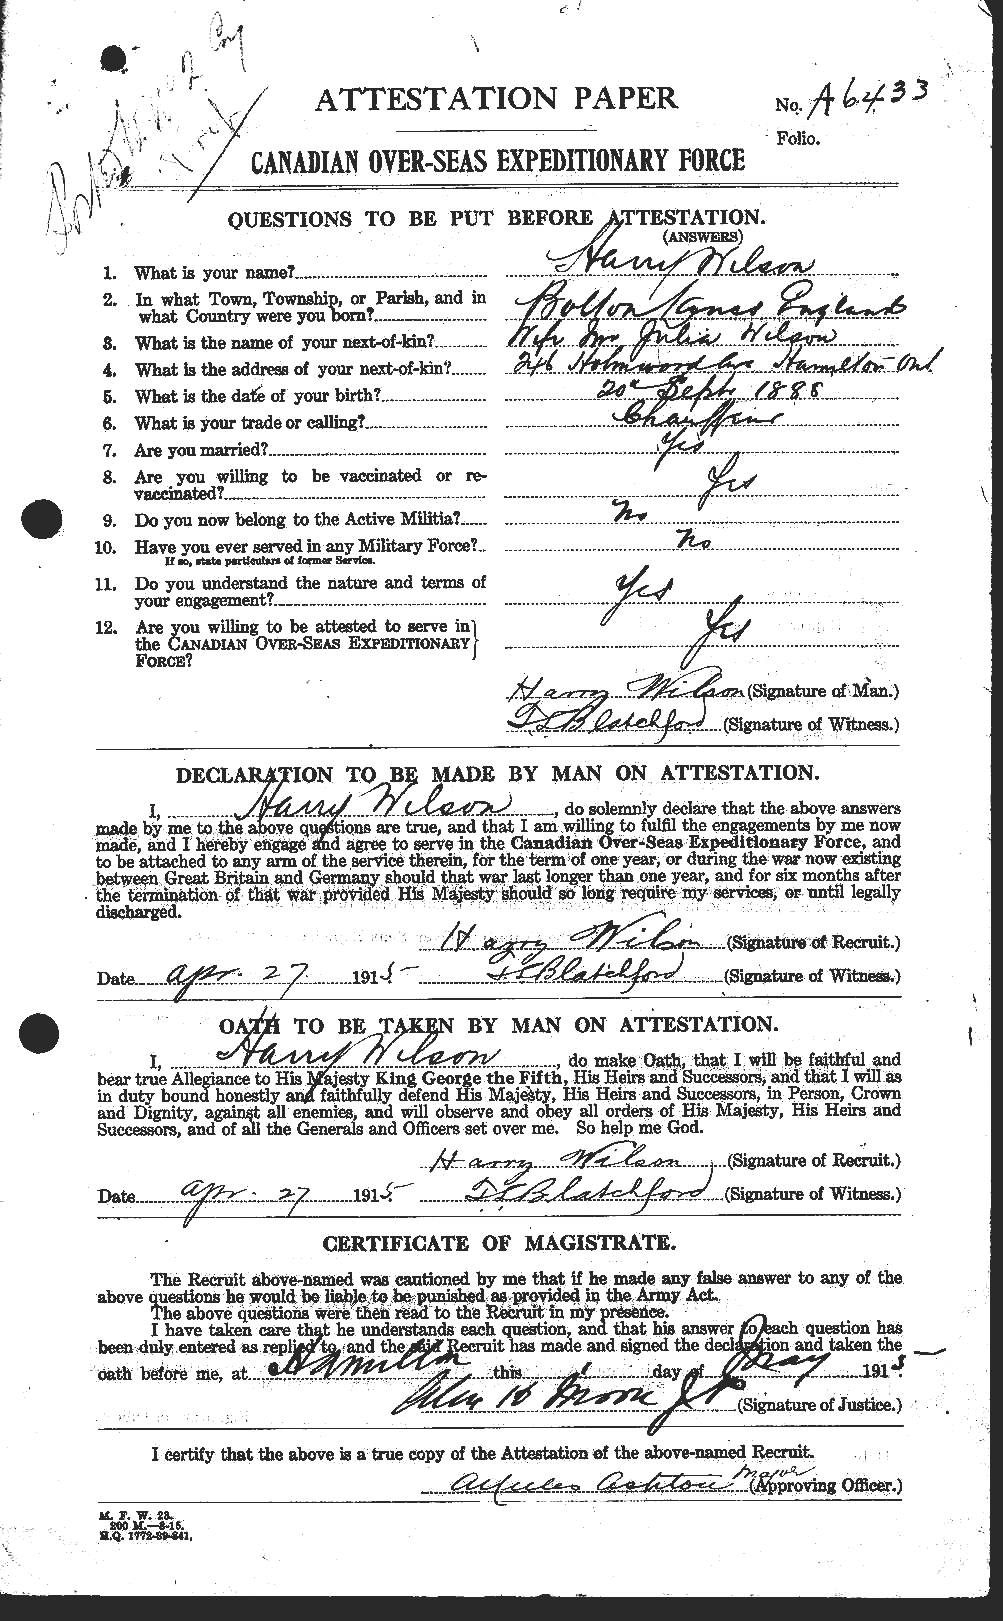 Personnel Records of the First World War - CEF 679426a